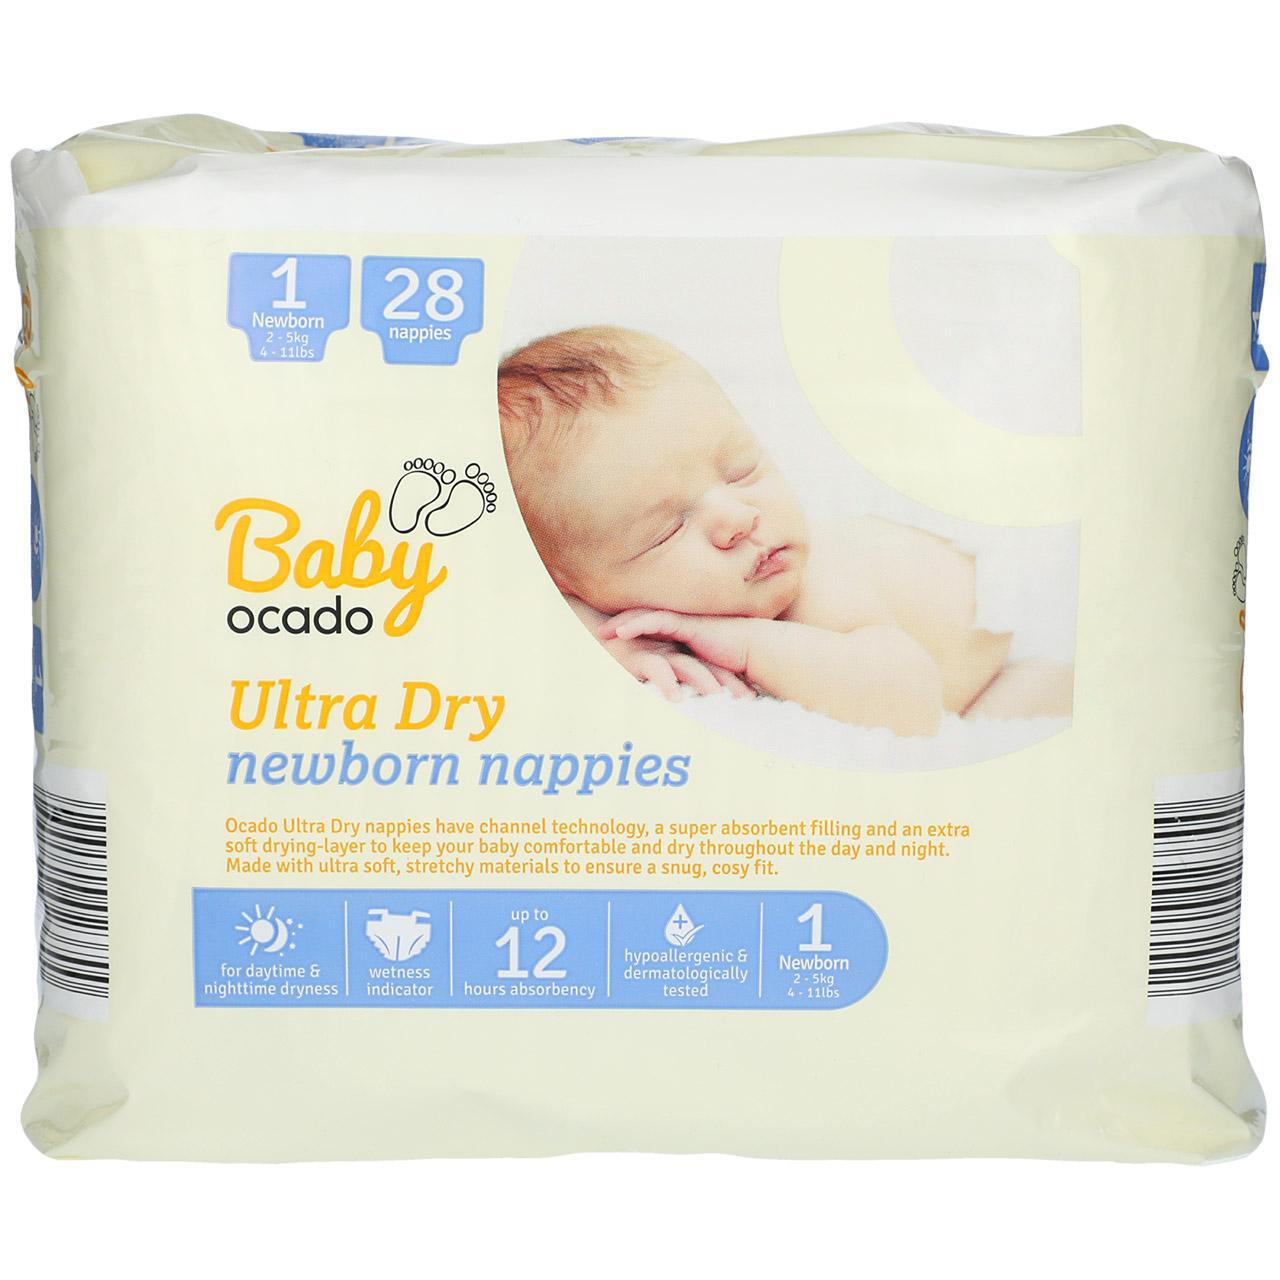 Baby Ocado Ultra Dry Nappies, Size 1 28 per pack